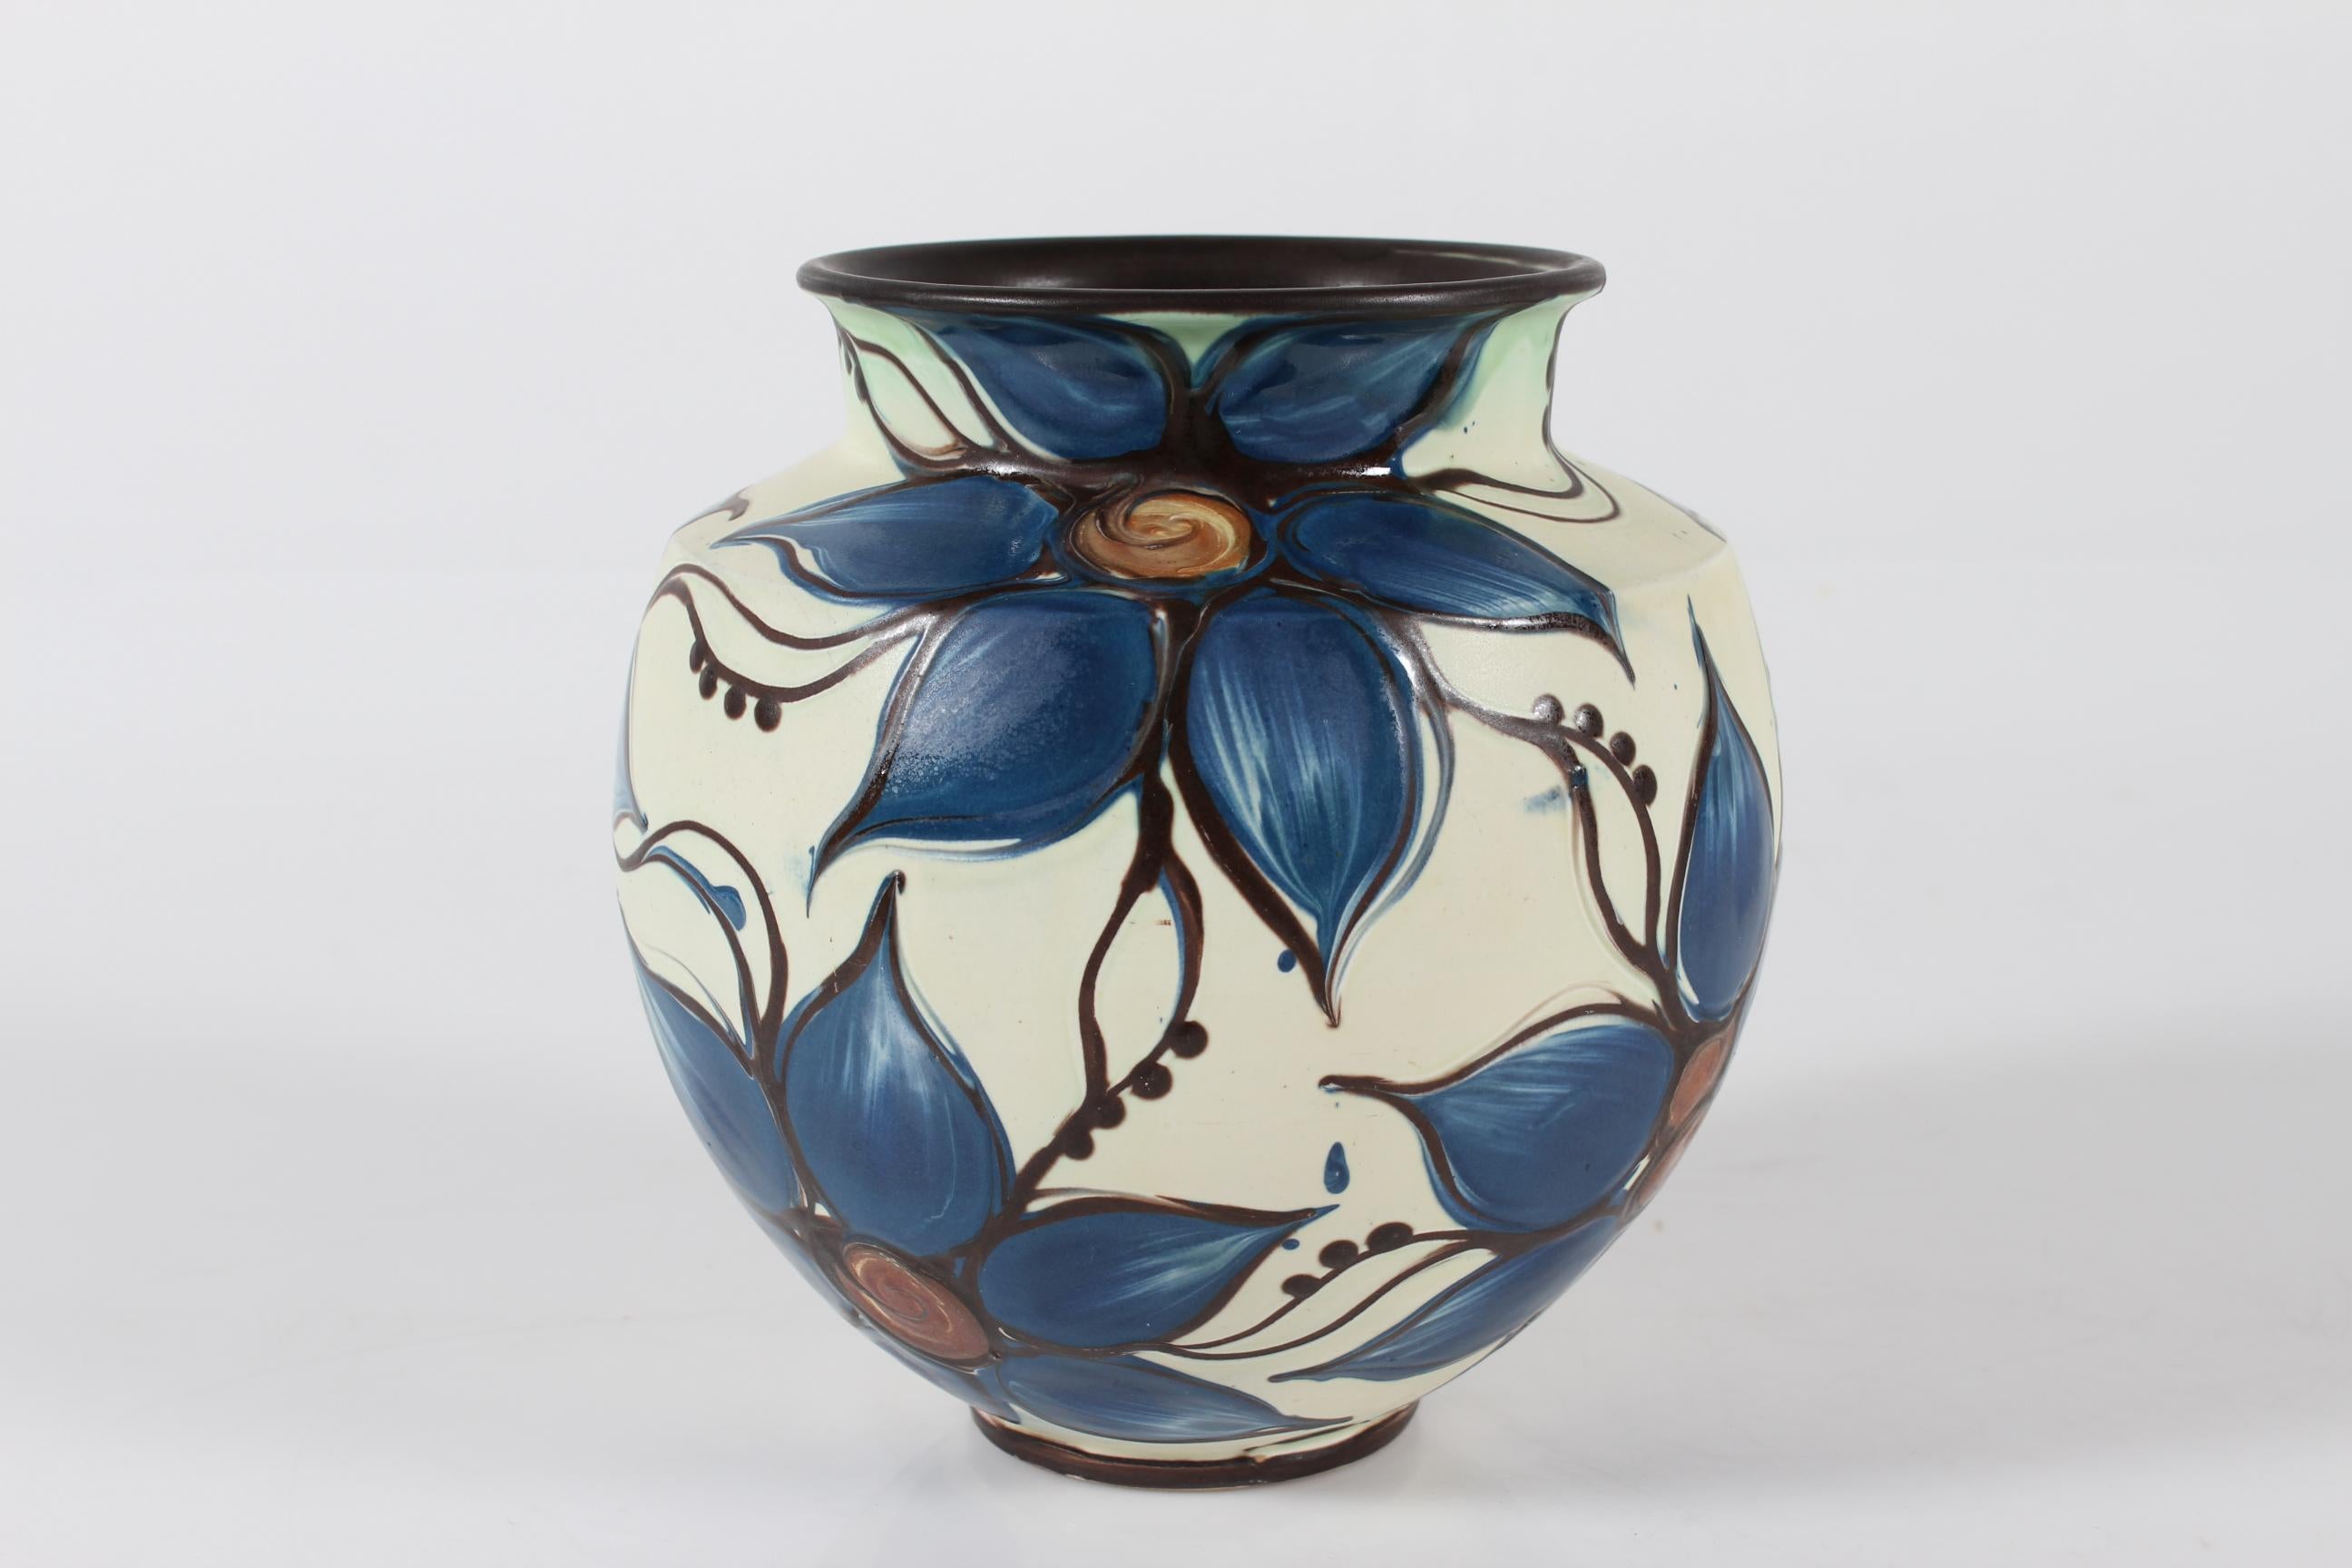 Danish Art Nouveau ceramic vase made by the workshop Herman A. Kähler in the early 20th century (1915-1925).
Floral decoration most likely by Sofie Lundstein who worked for Herman A. Kähler for decades

The vase is decorated with the difficult cow